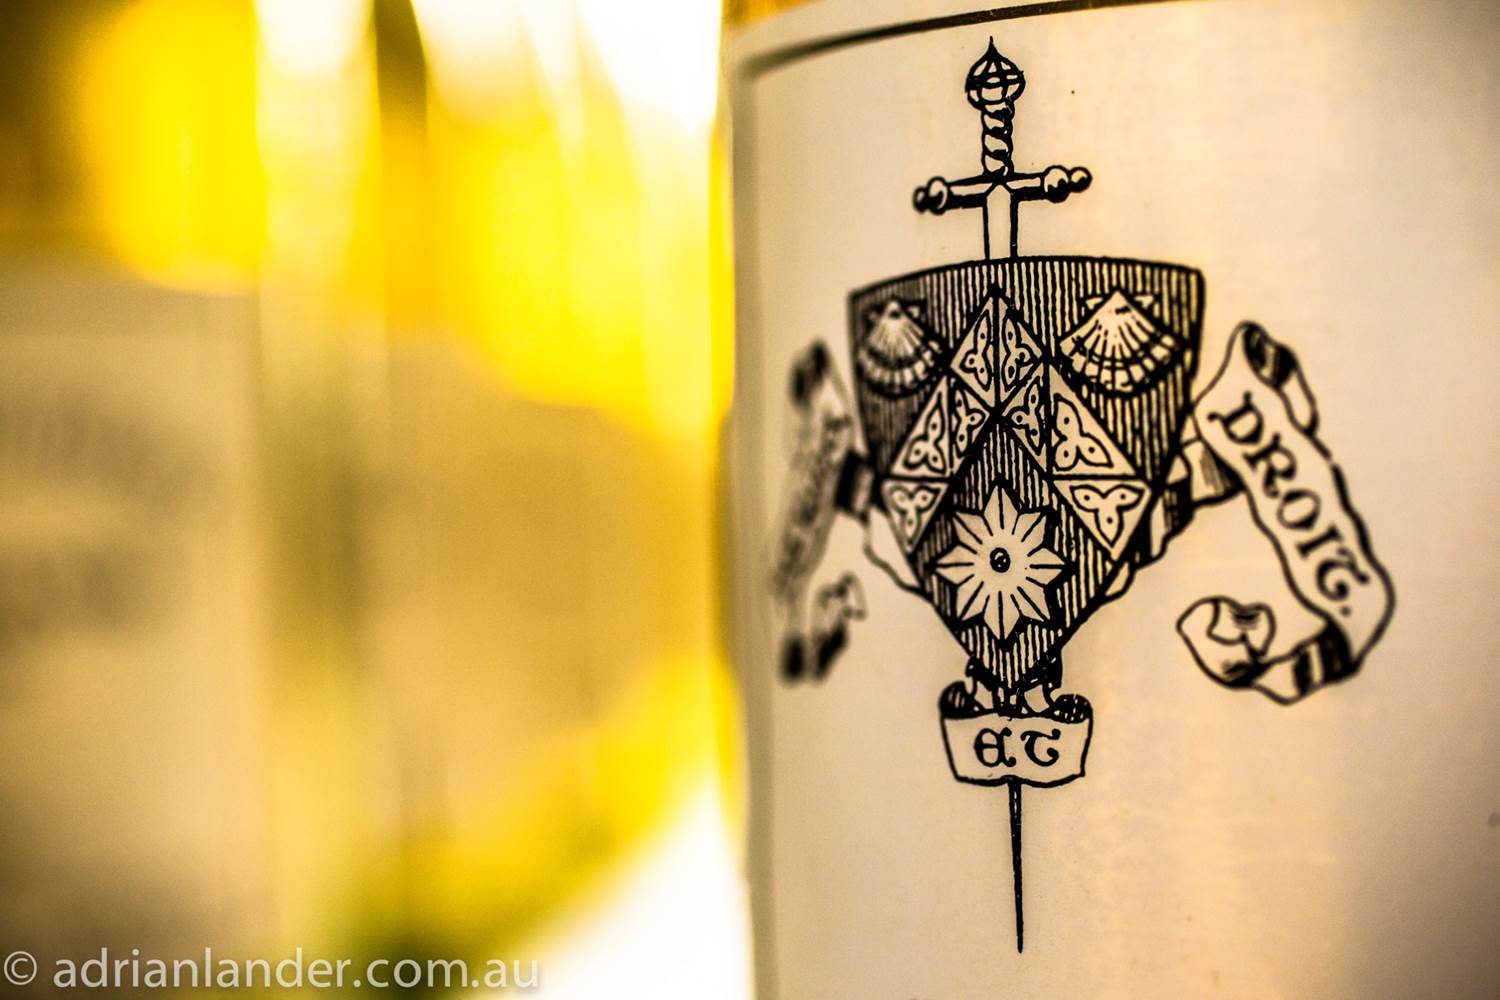 artful image of white wine in glass and bottle label